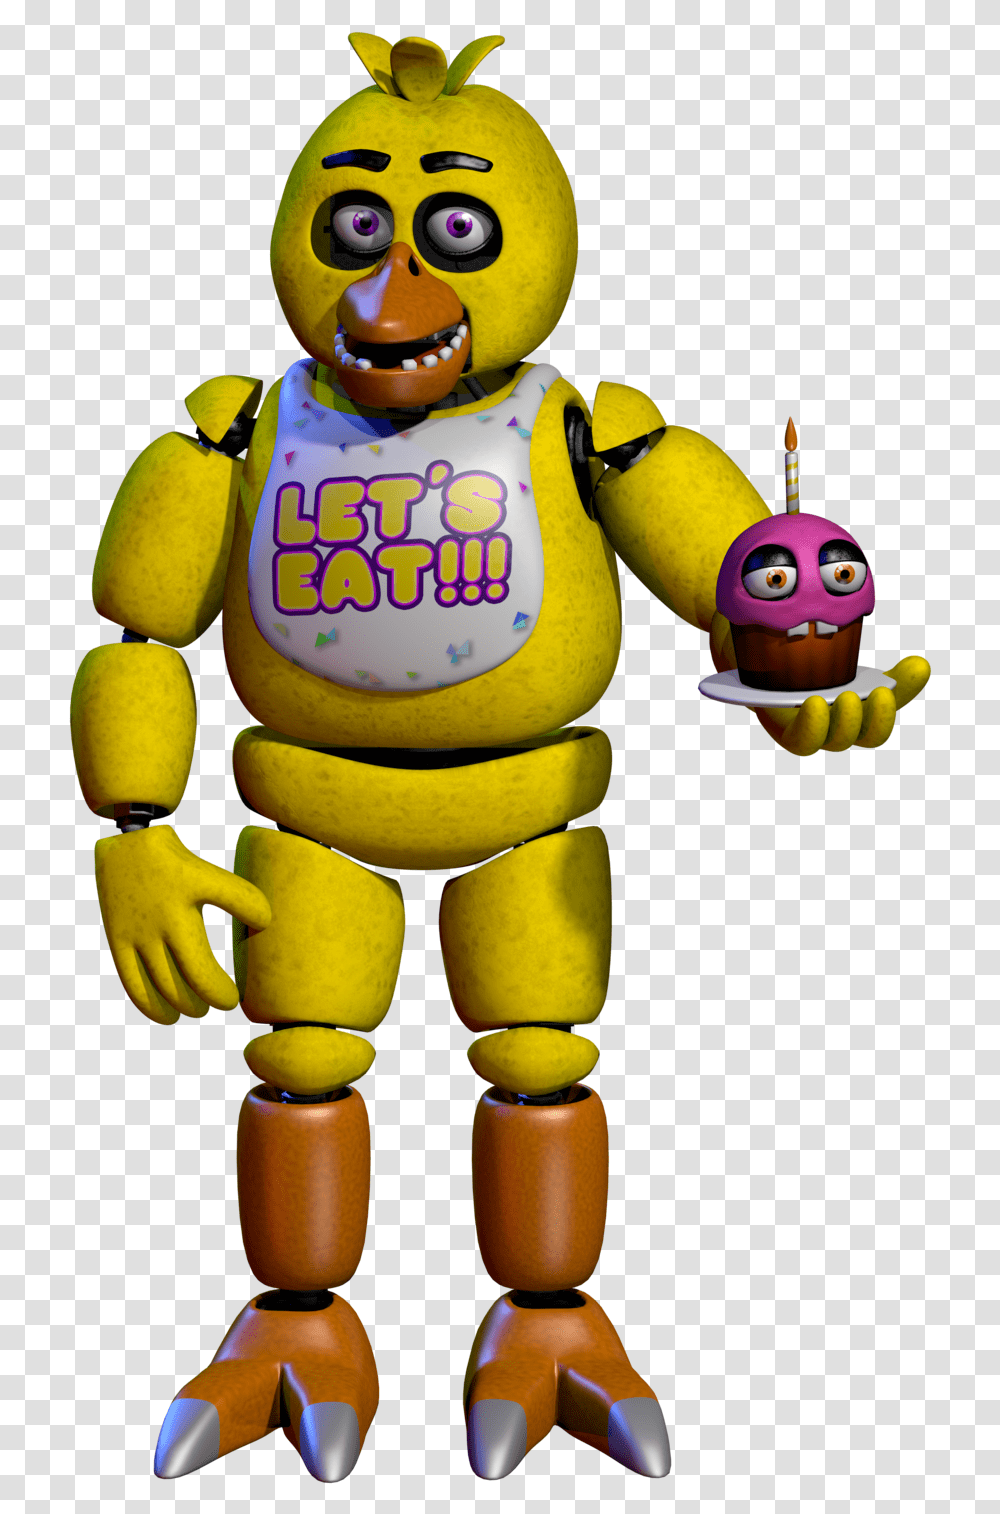 Fnaf Vr Help Wanted Chica, Figurine, Inflatable, Banana, Food Transparent Png